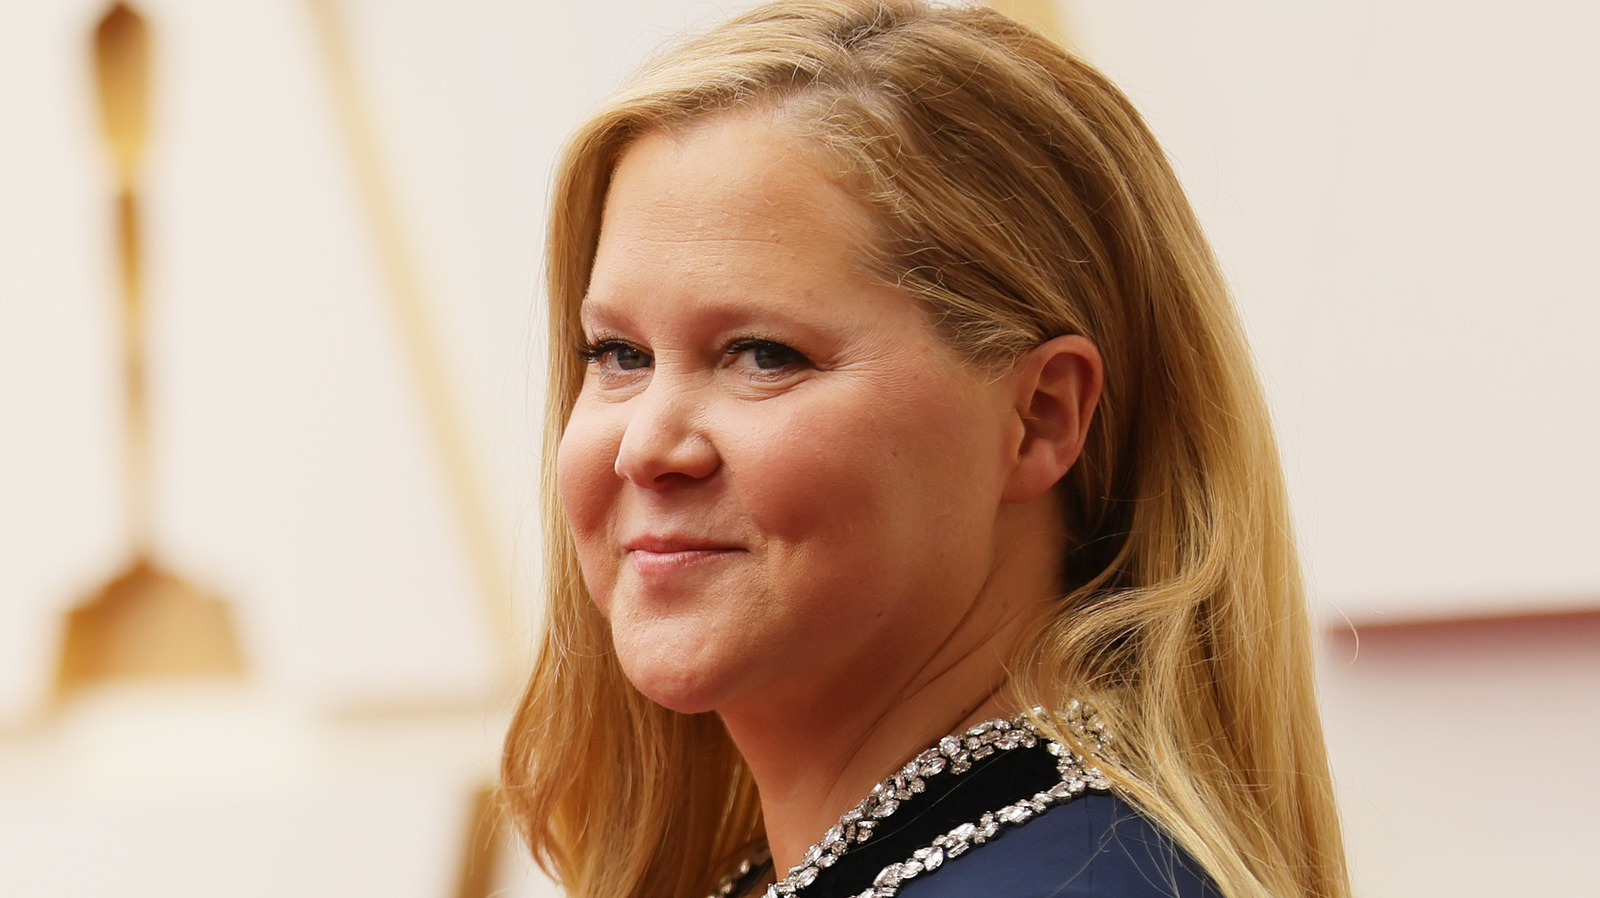 Amy Schumer's Oscars Monologue Turns Into A Fierce Roast Session